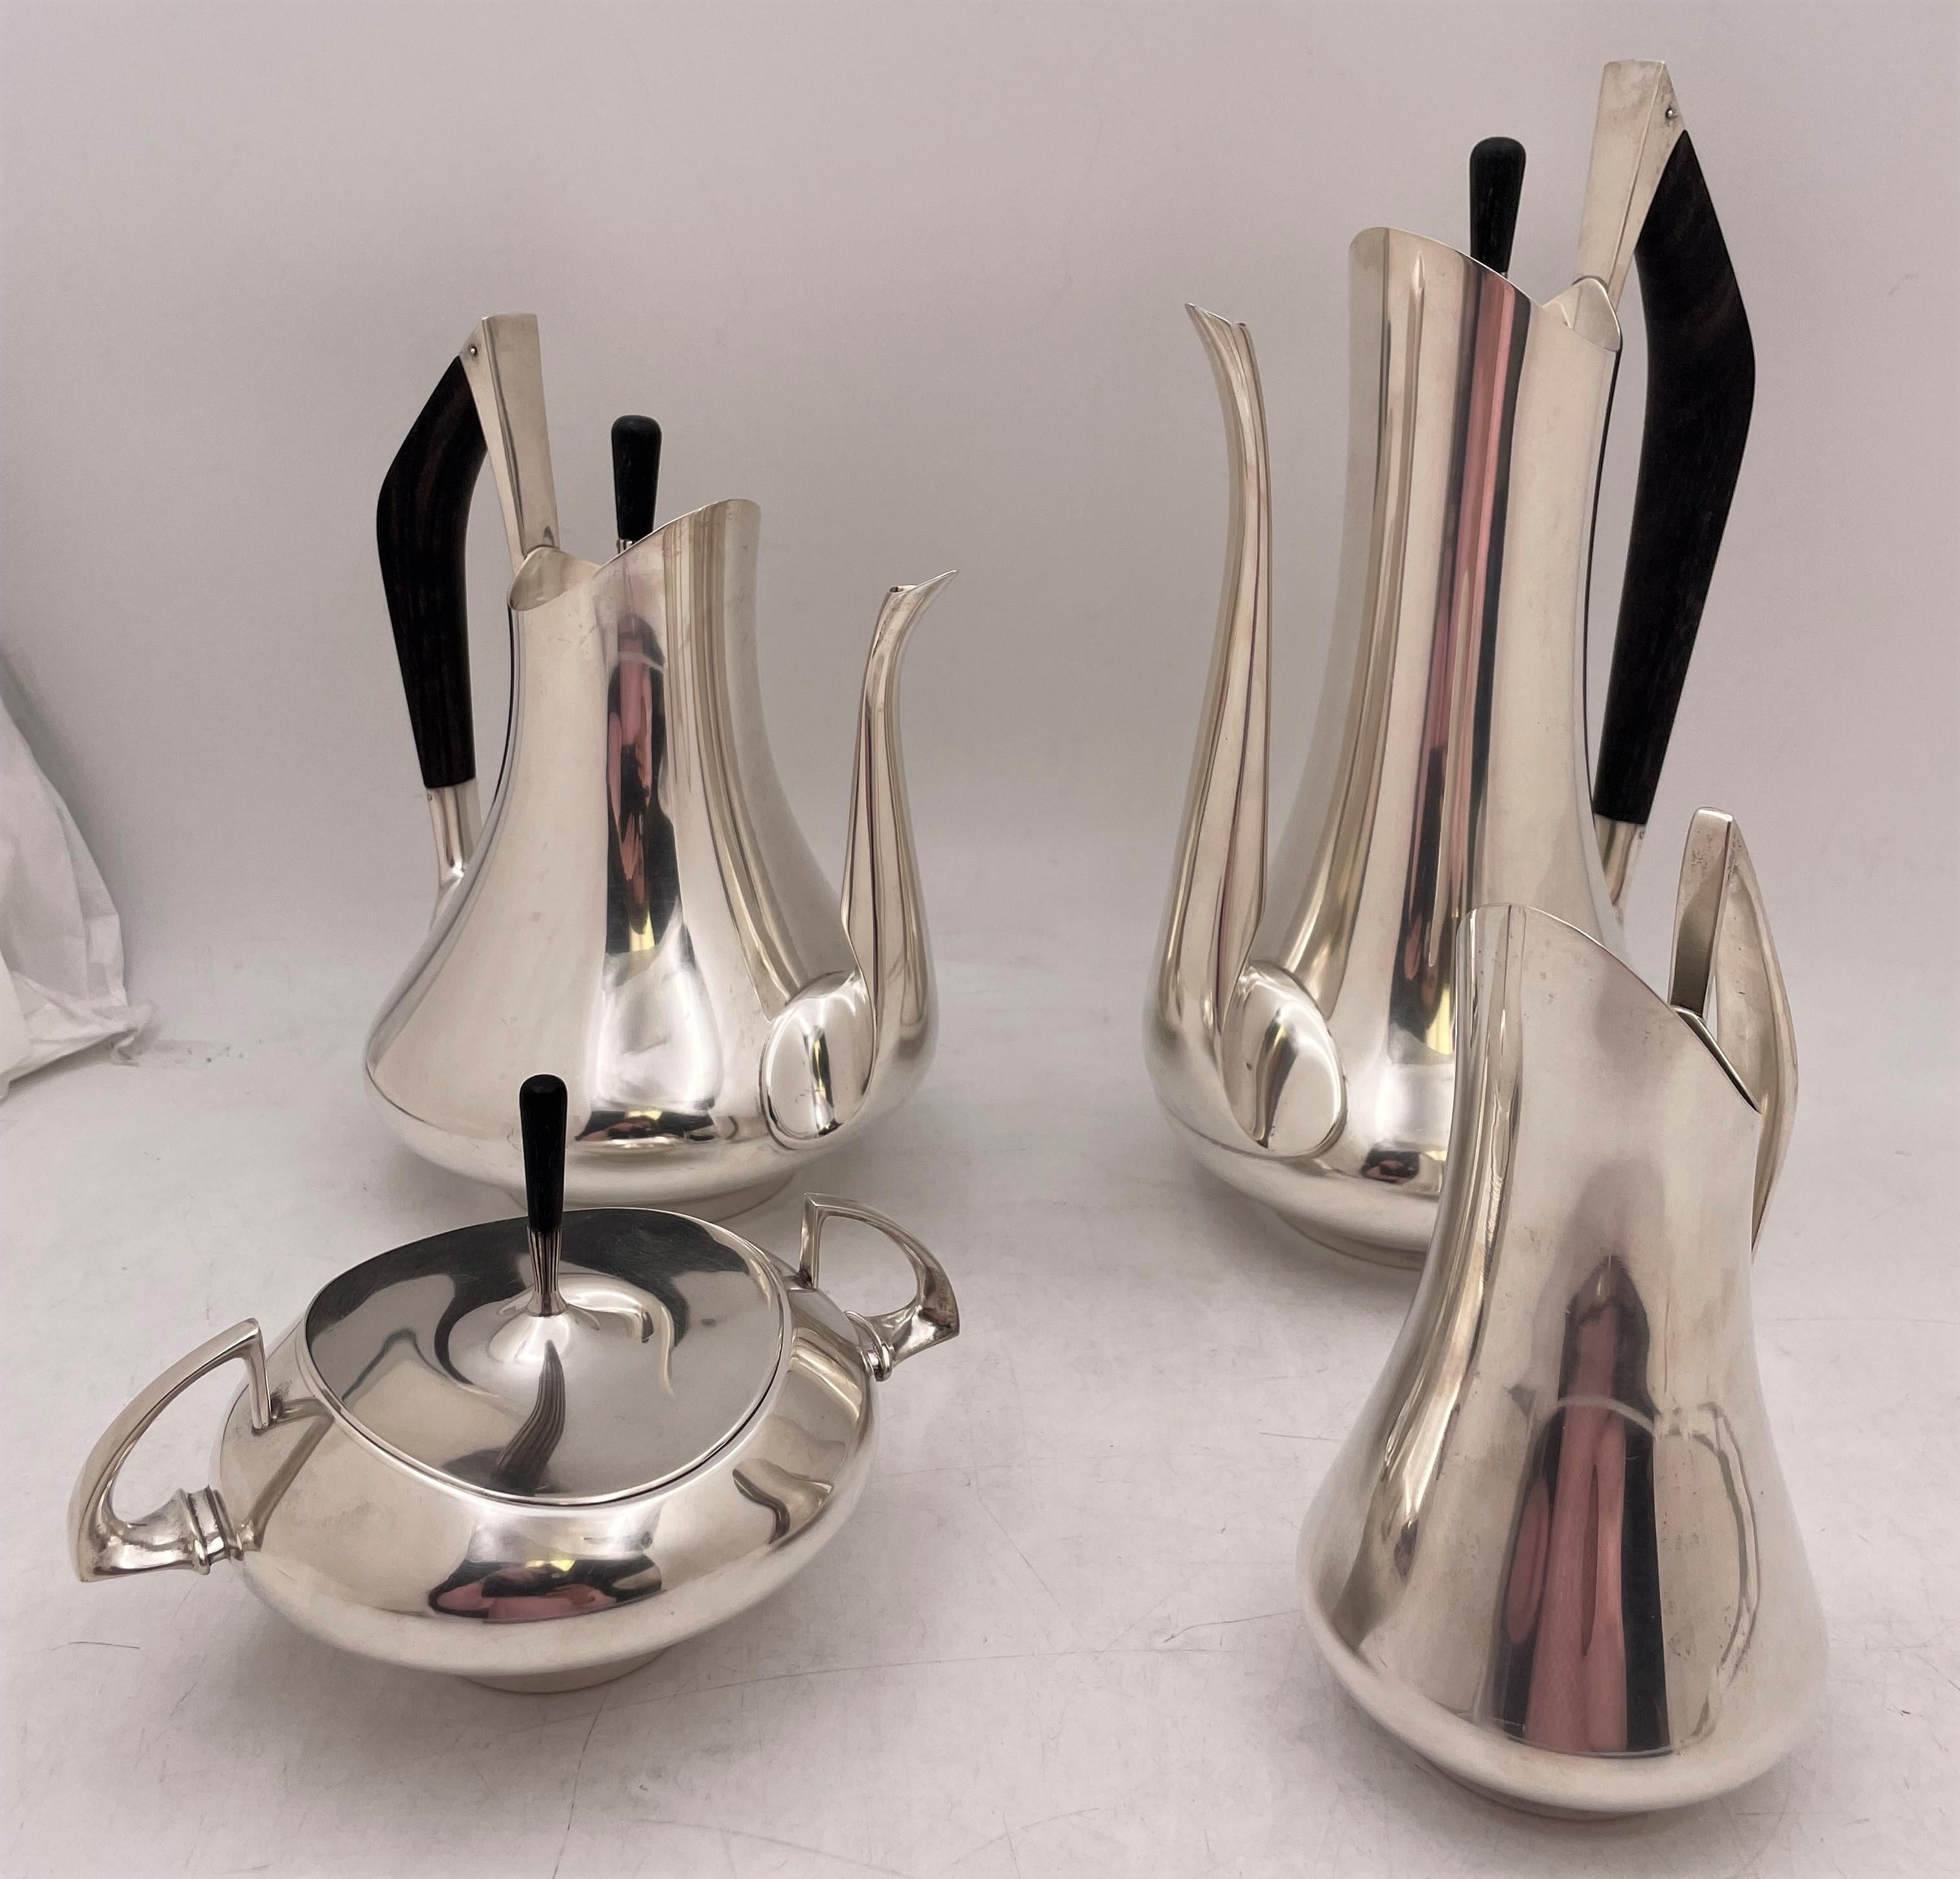 Gorham by Donald Colflesh 5-piece Sterling Tea Set in Mid-Century Modern style from 1967 consisting of:

- a coffee pot measuring 12'' by 7''

- a tea pot measuring 9 1/2